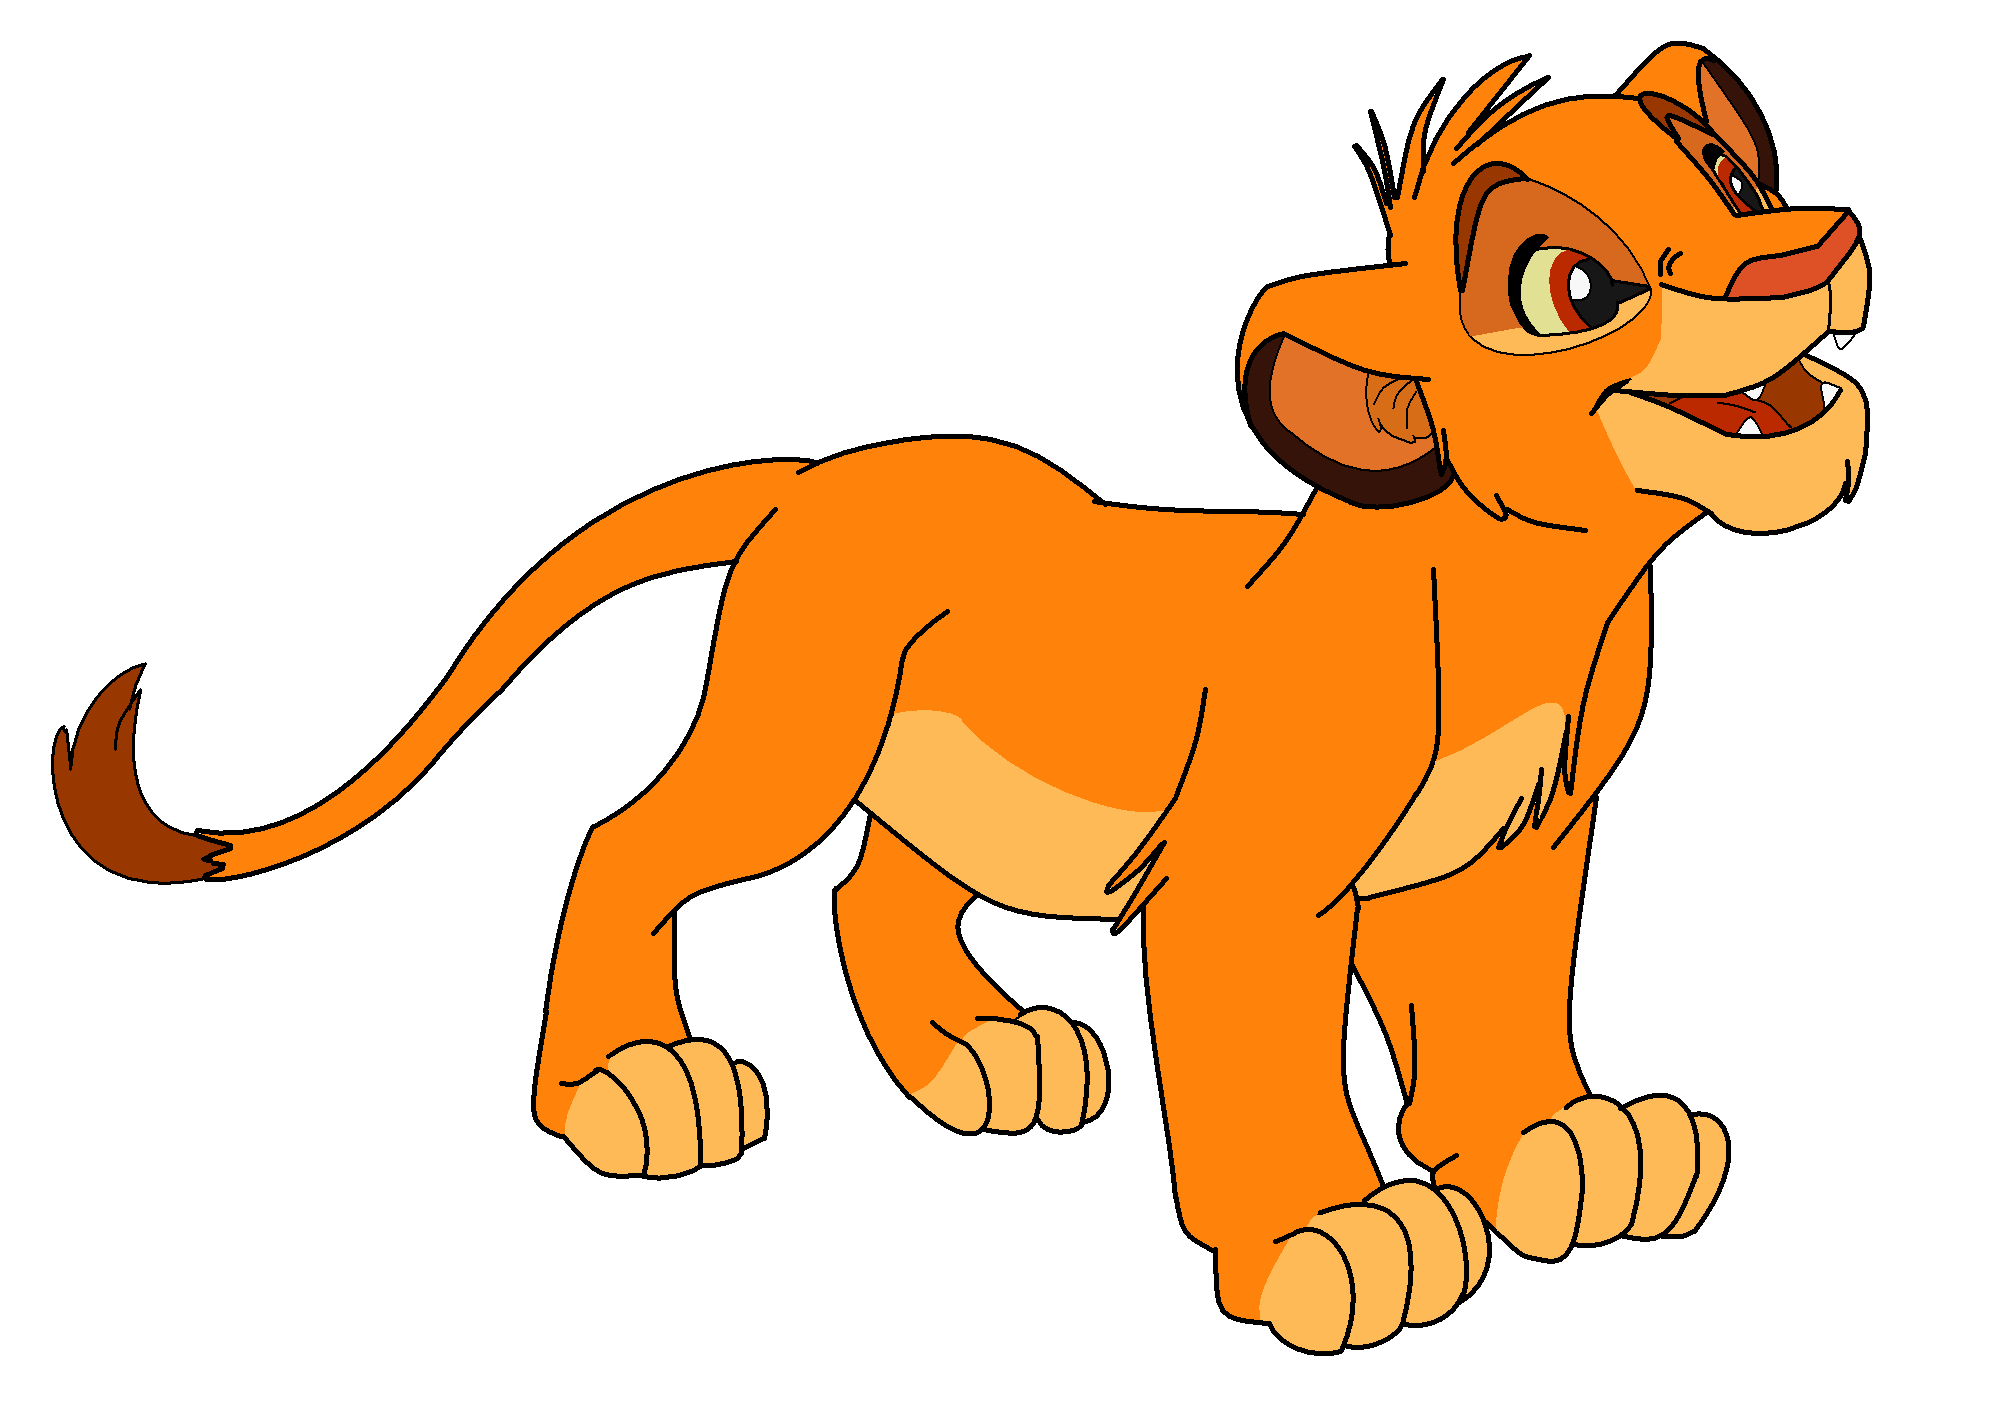 The new collection of the courage lion Simba Wallpapers | Tumblr Life